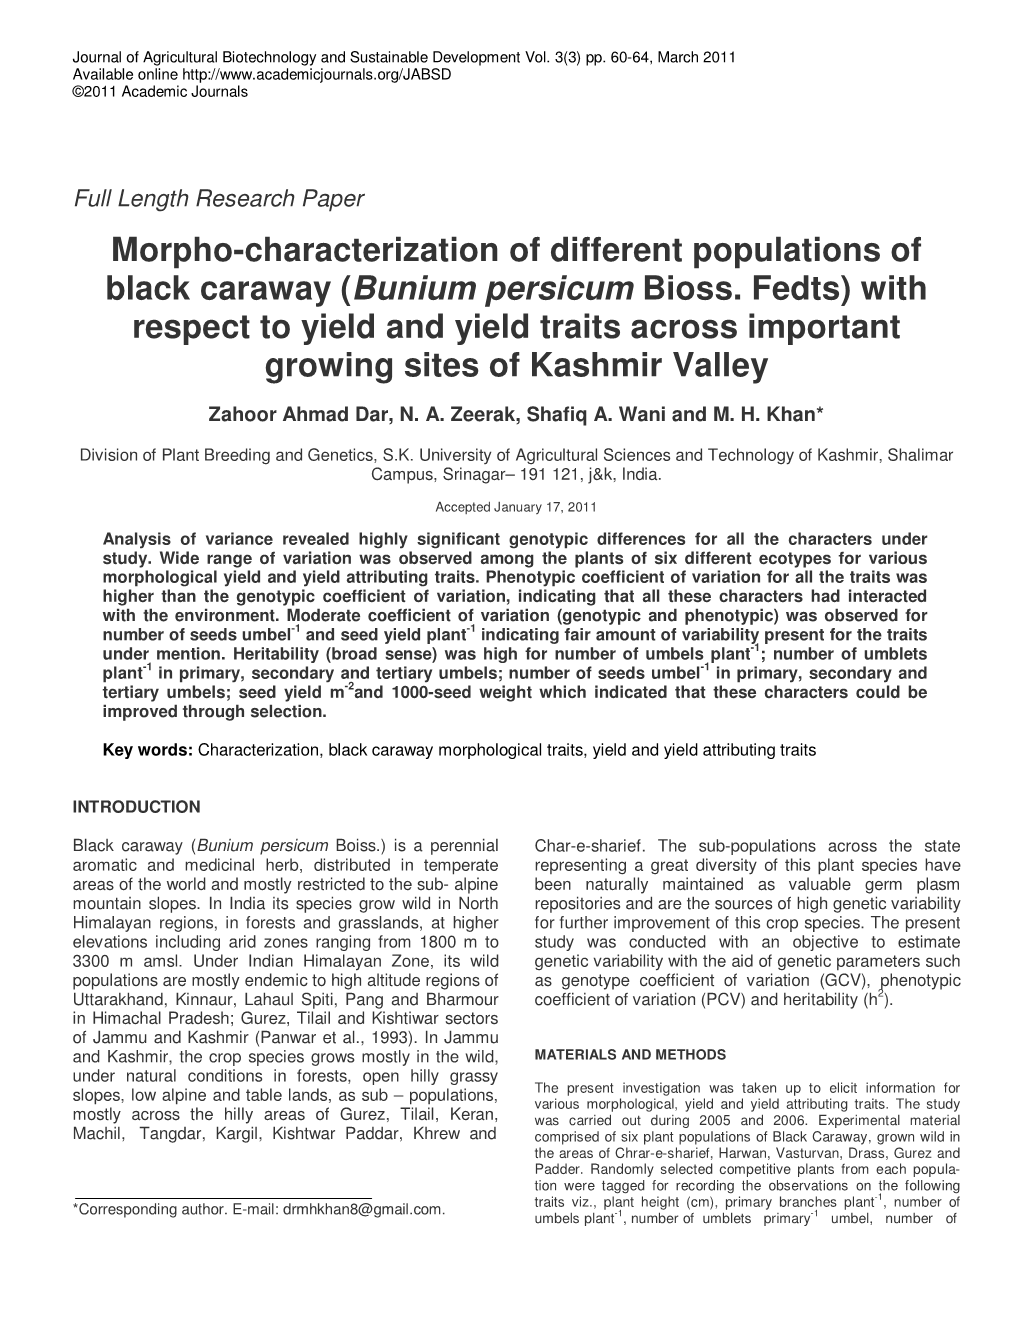 (Bunium Persicum Bioss. Fedts) with Respect to Yield and Yield